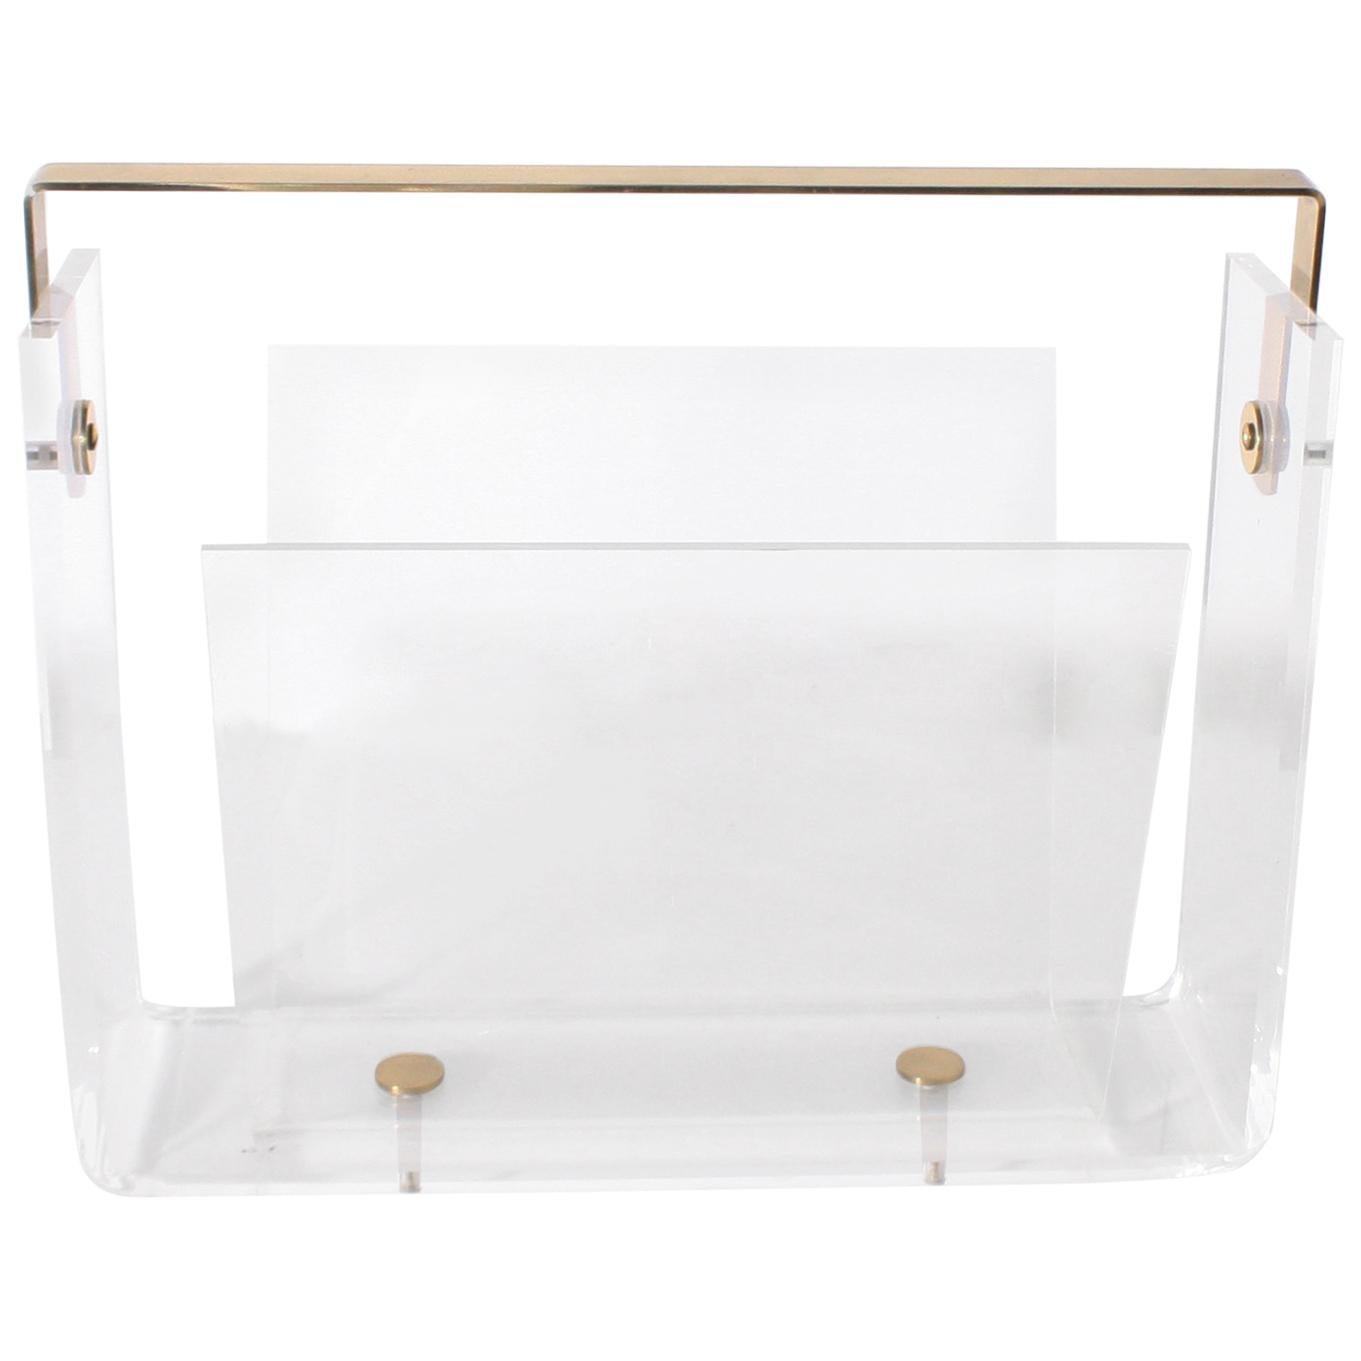 Lucite Magazine Rack with Brass Handle and Detail, circa 1960